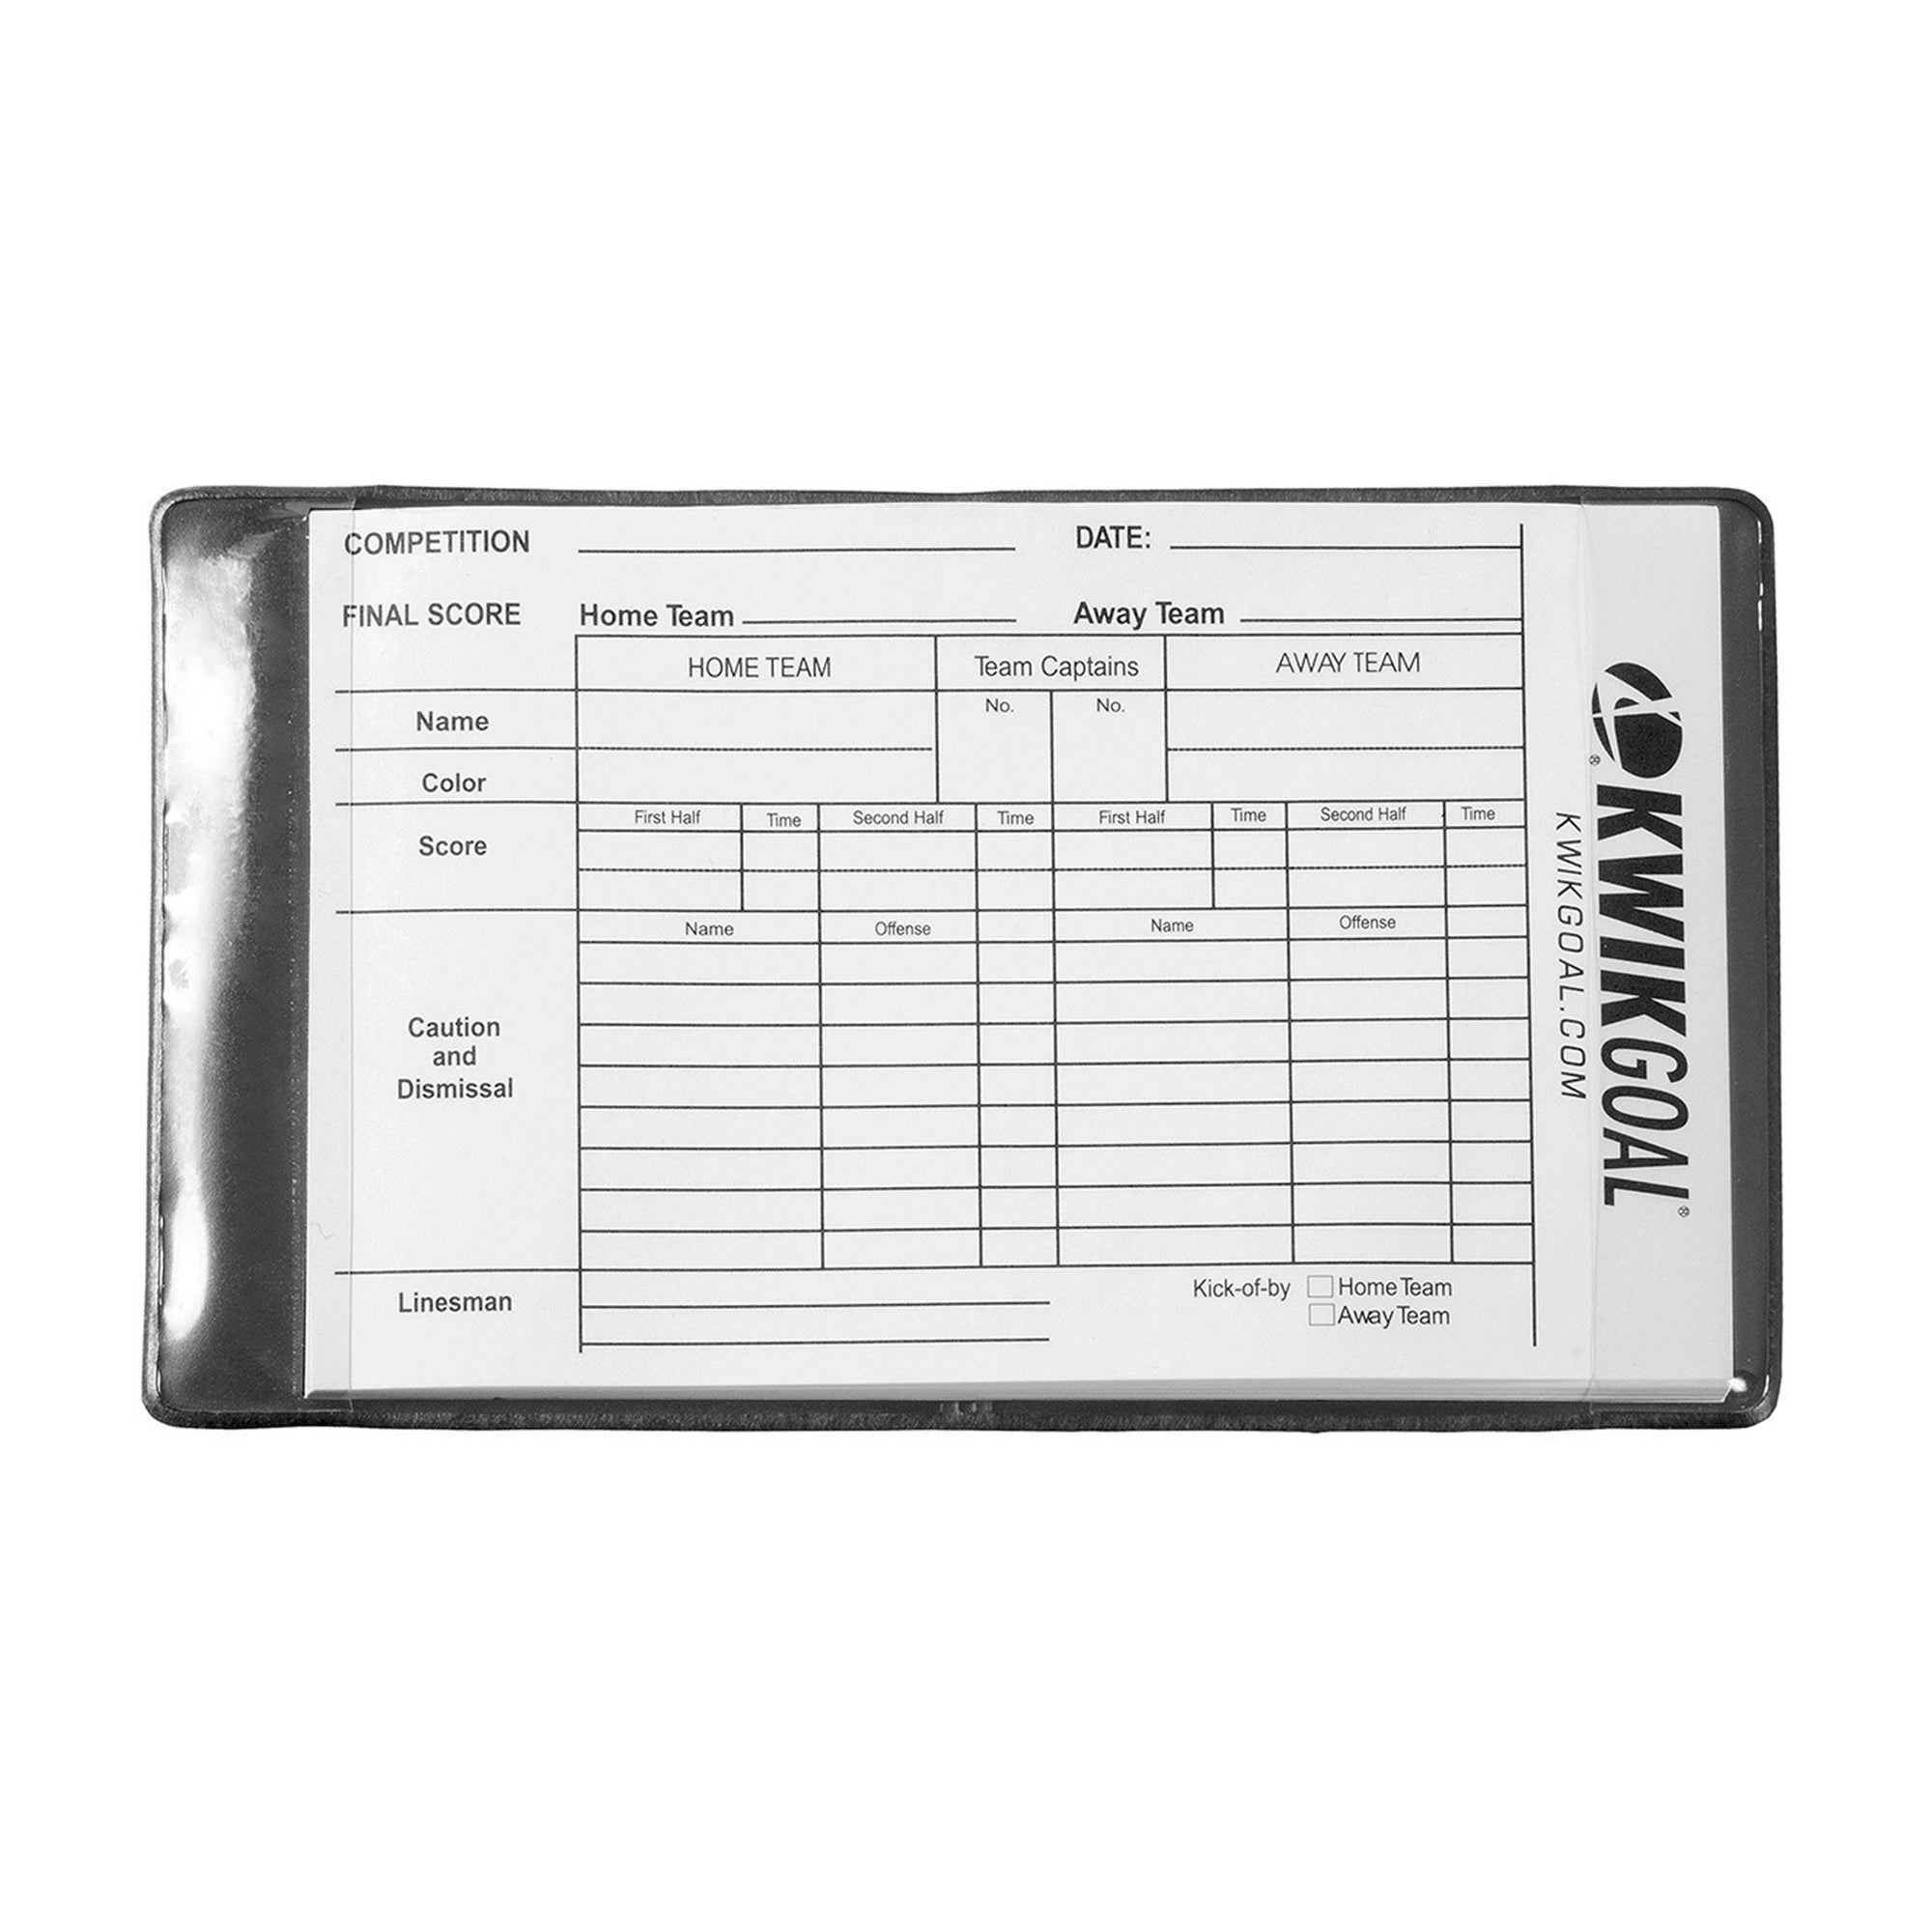 Rugby Imports Kwik Goal Referee Wallet